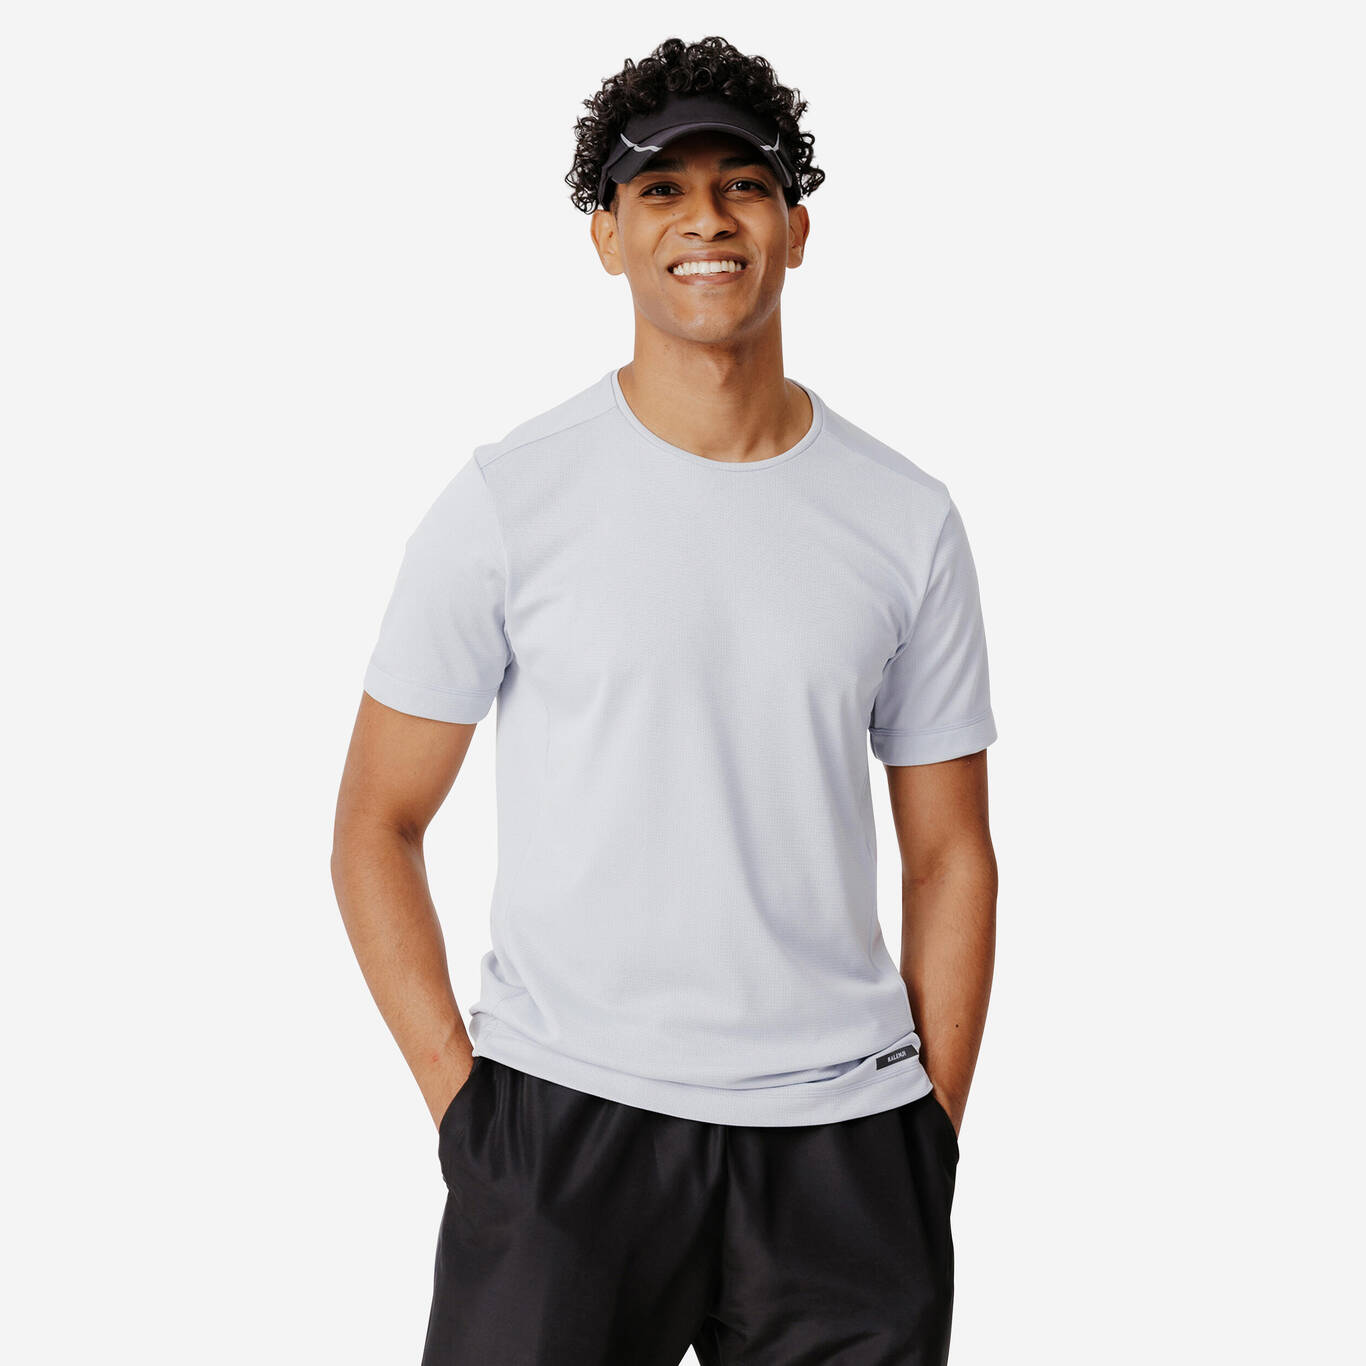 Dry Men's Breathable Running T-shirt - Pearl grey